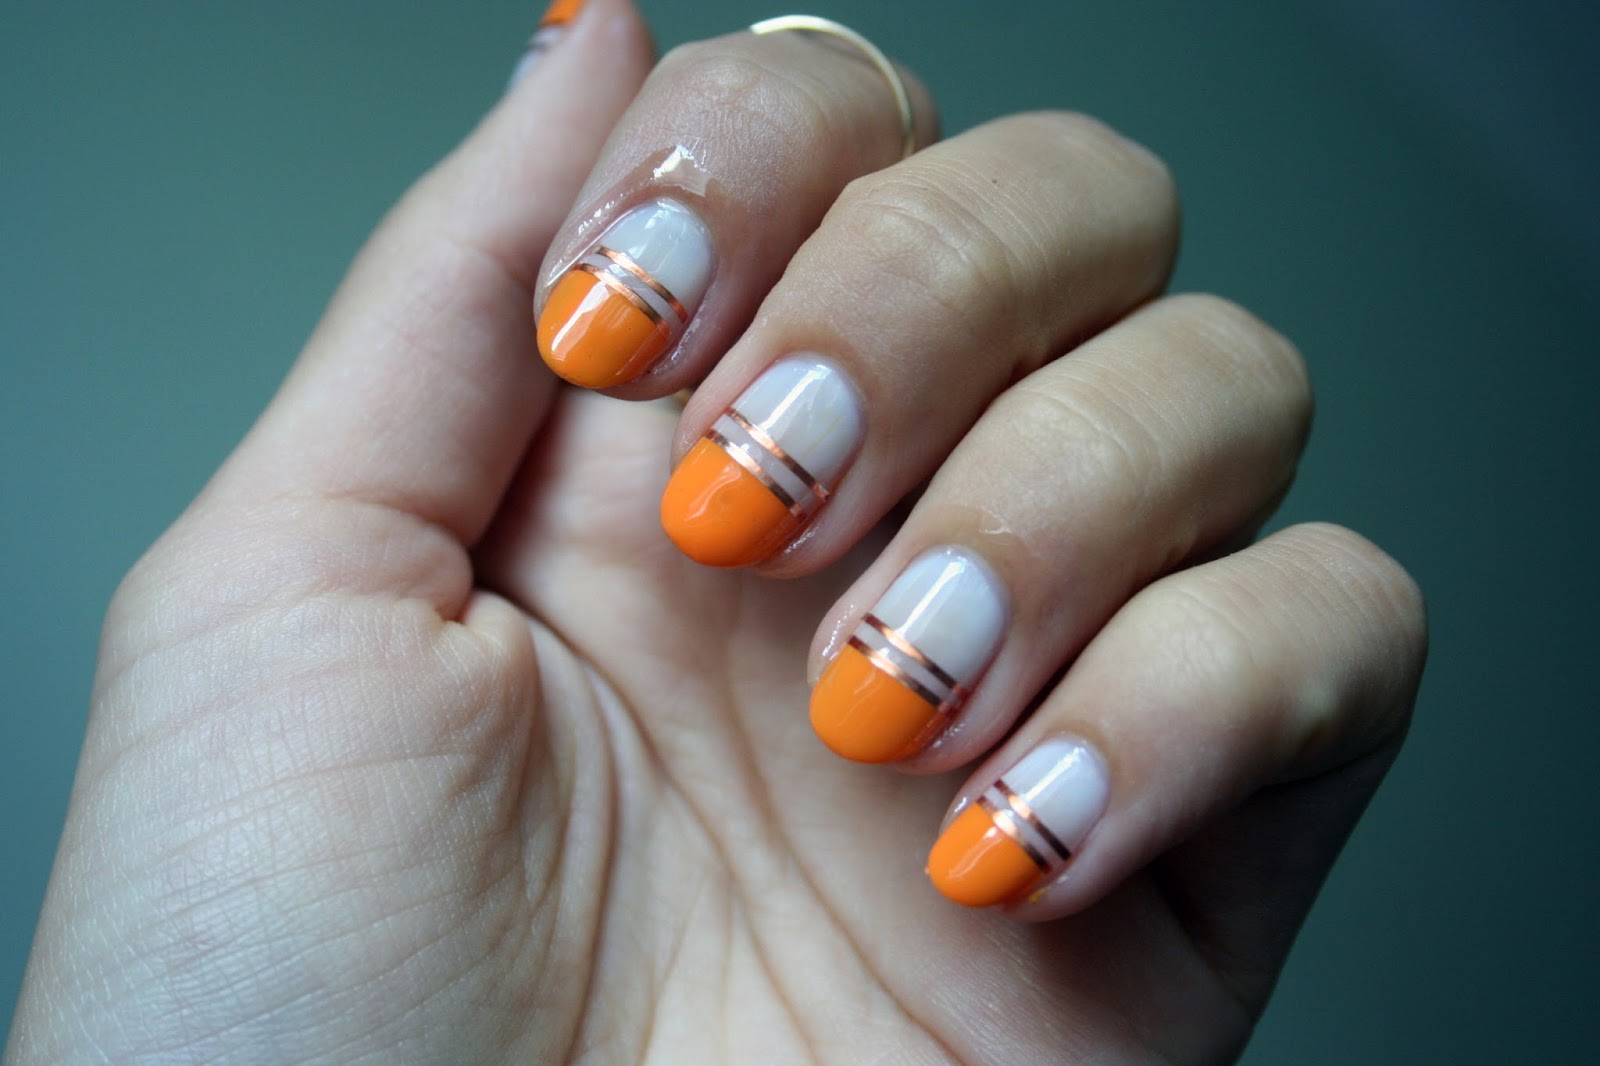 Manicure Monday Striping Tape Nail Art Guest Post - A Little Obsessed